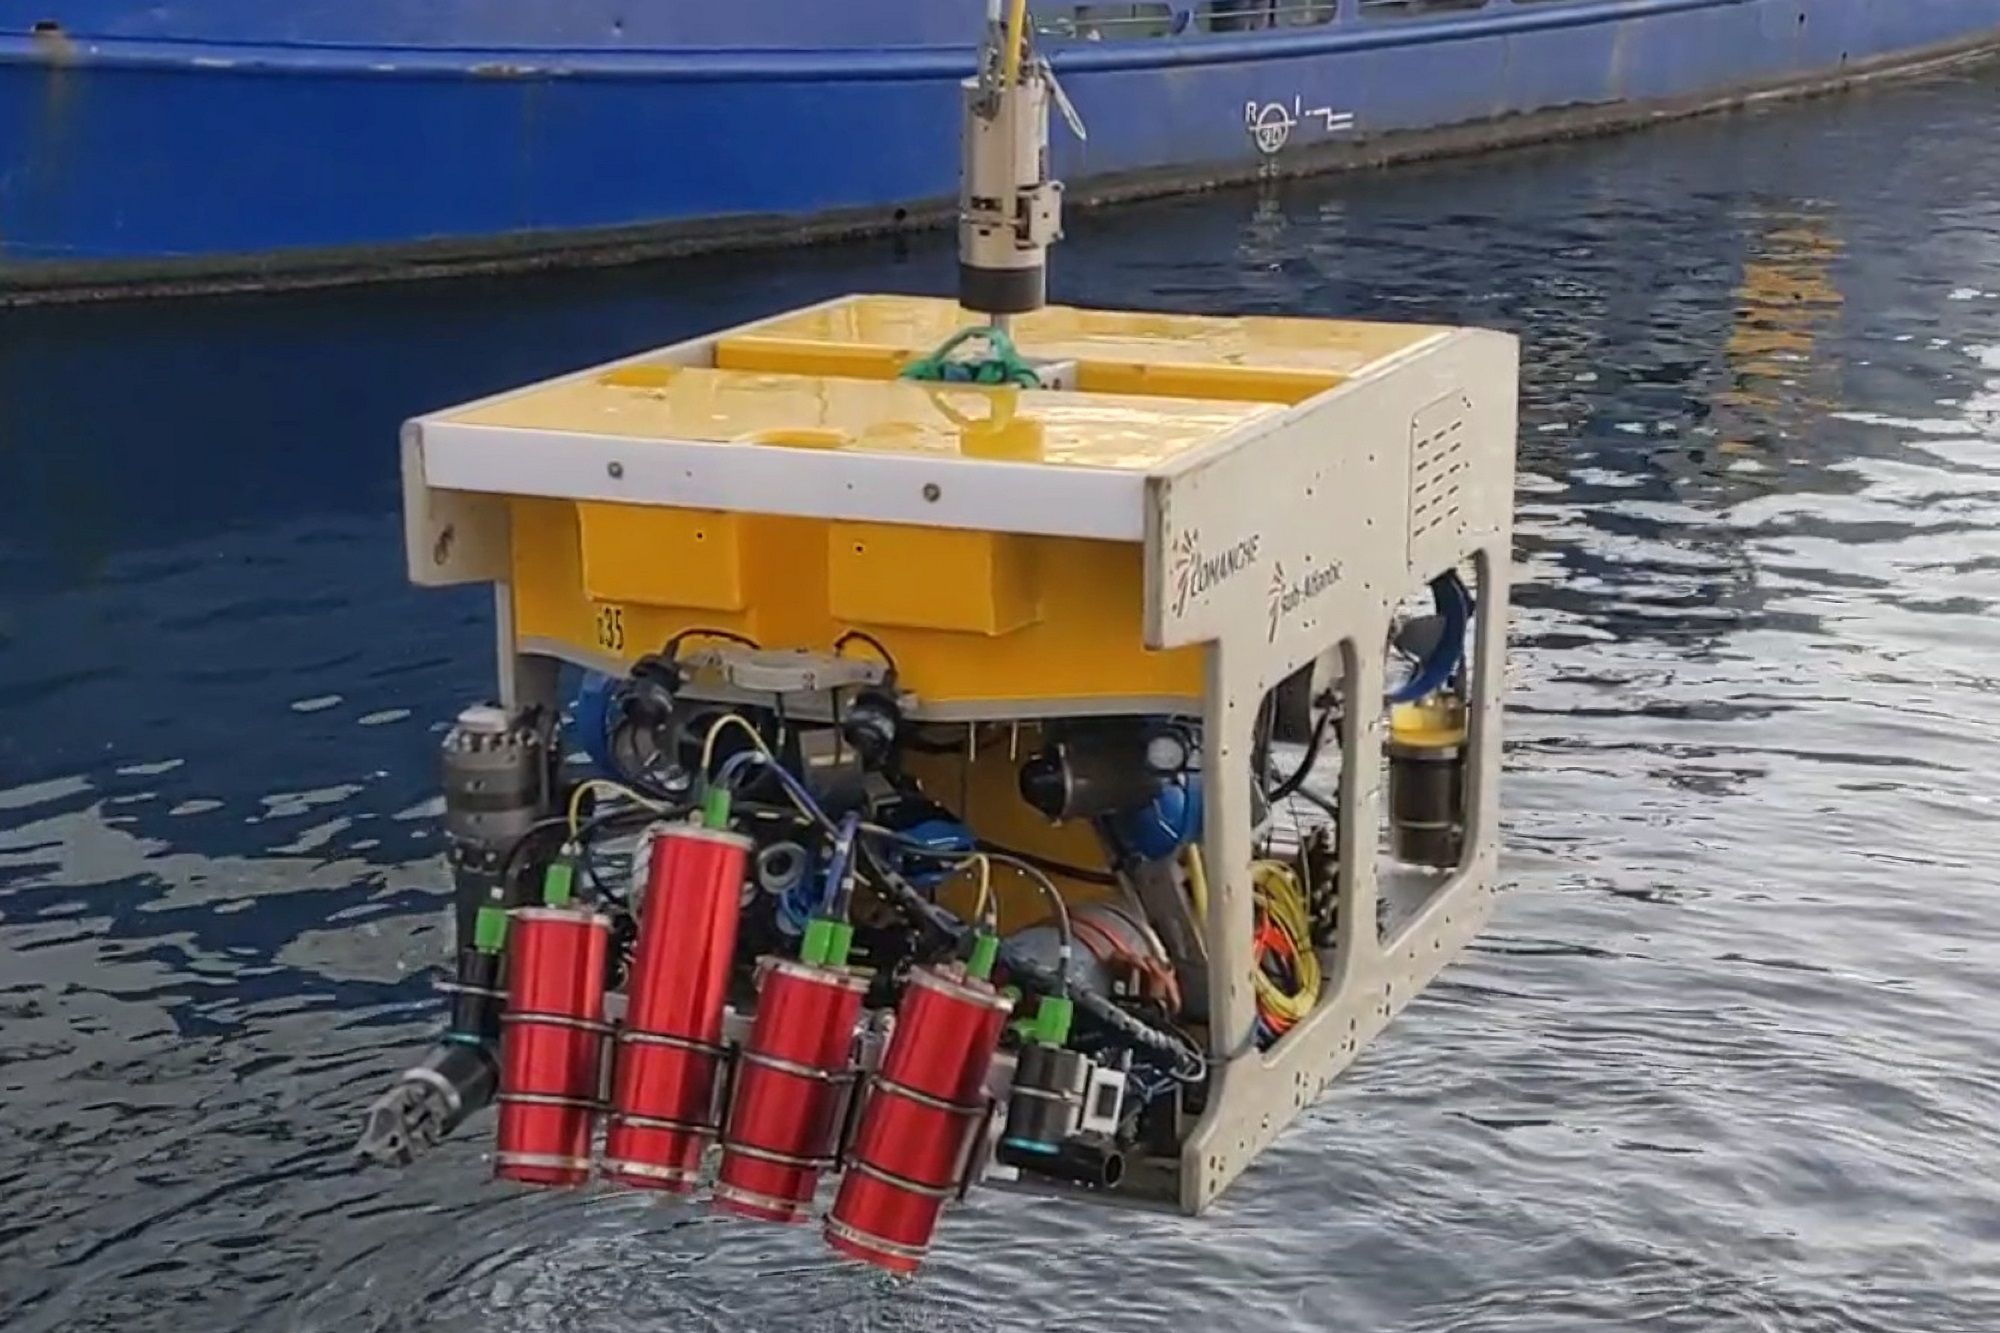 The underwater 3D sensor goDEEP3D (red), operationally mounted on a remotely operated vehicle (ROV).